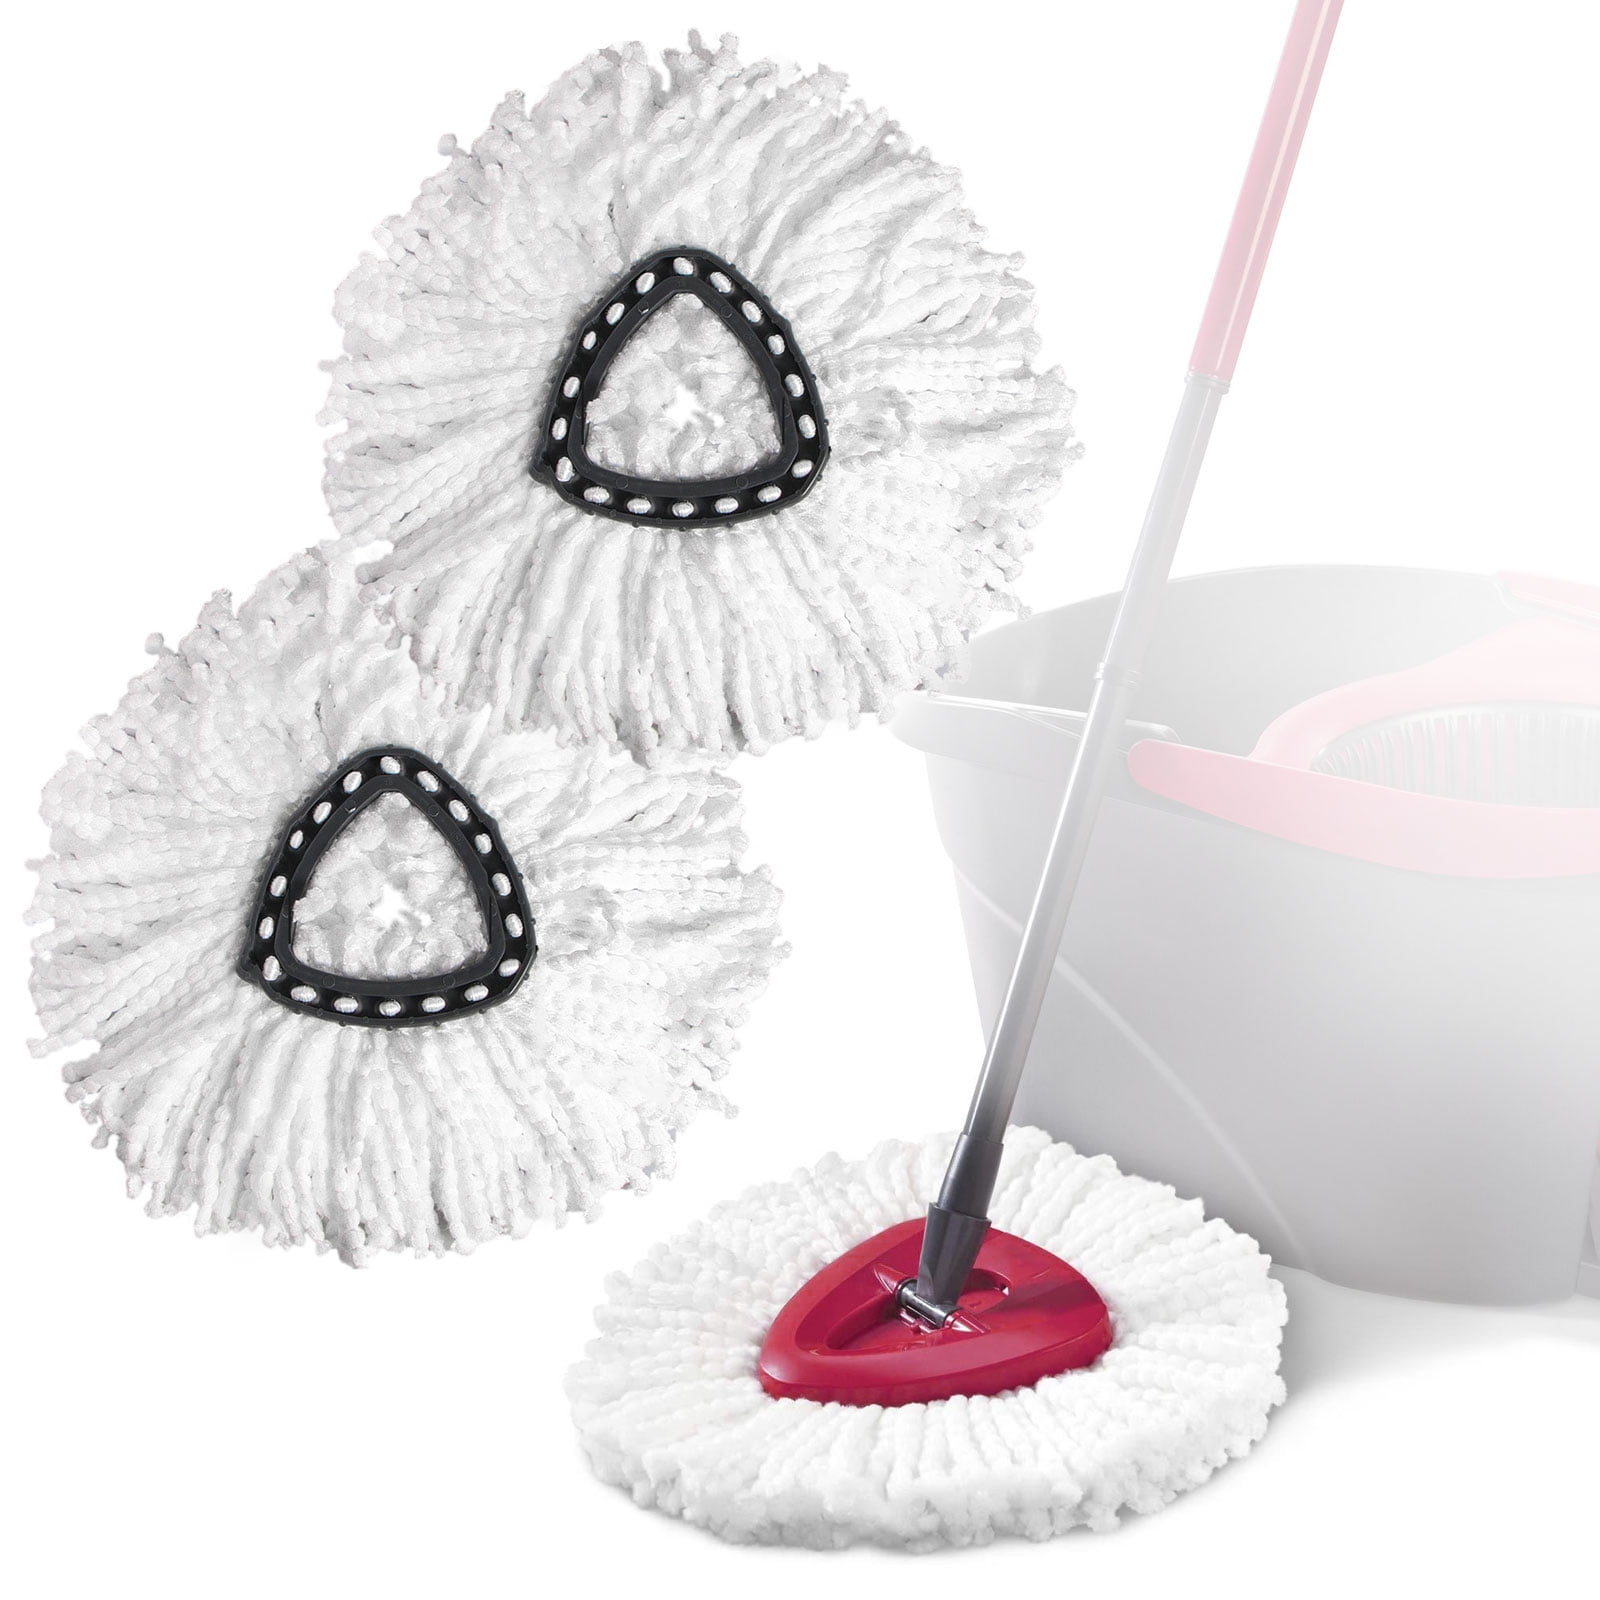 Microfiber Spin Mop Refills 4 Pack Mop Replacement Heads Compatible with Spin Mop Easy Cleaning Mop Head Replacement 